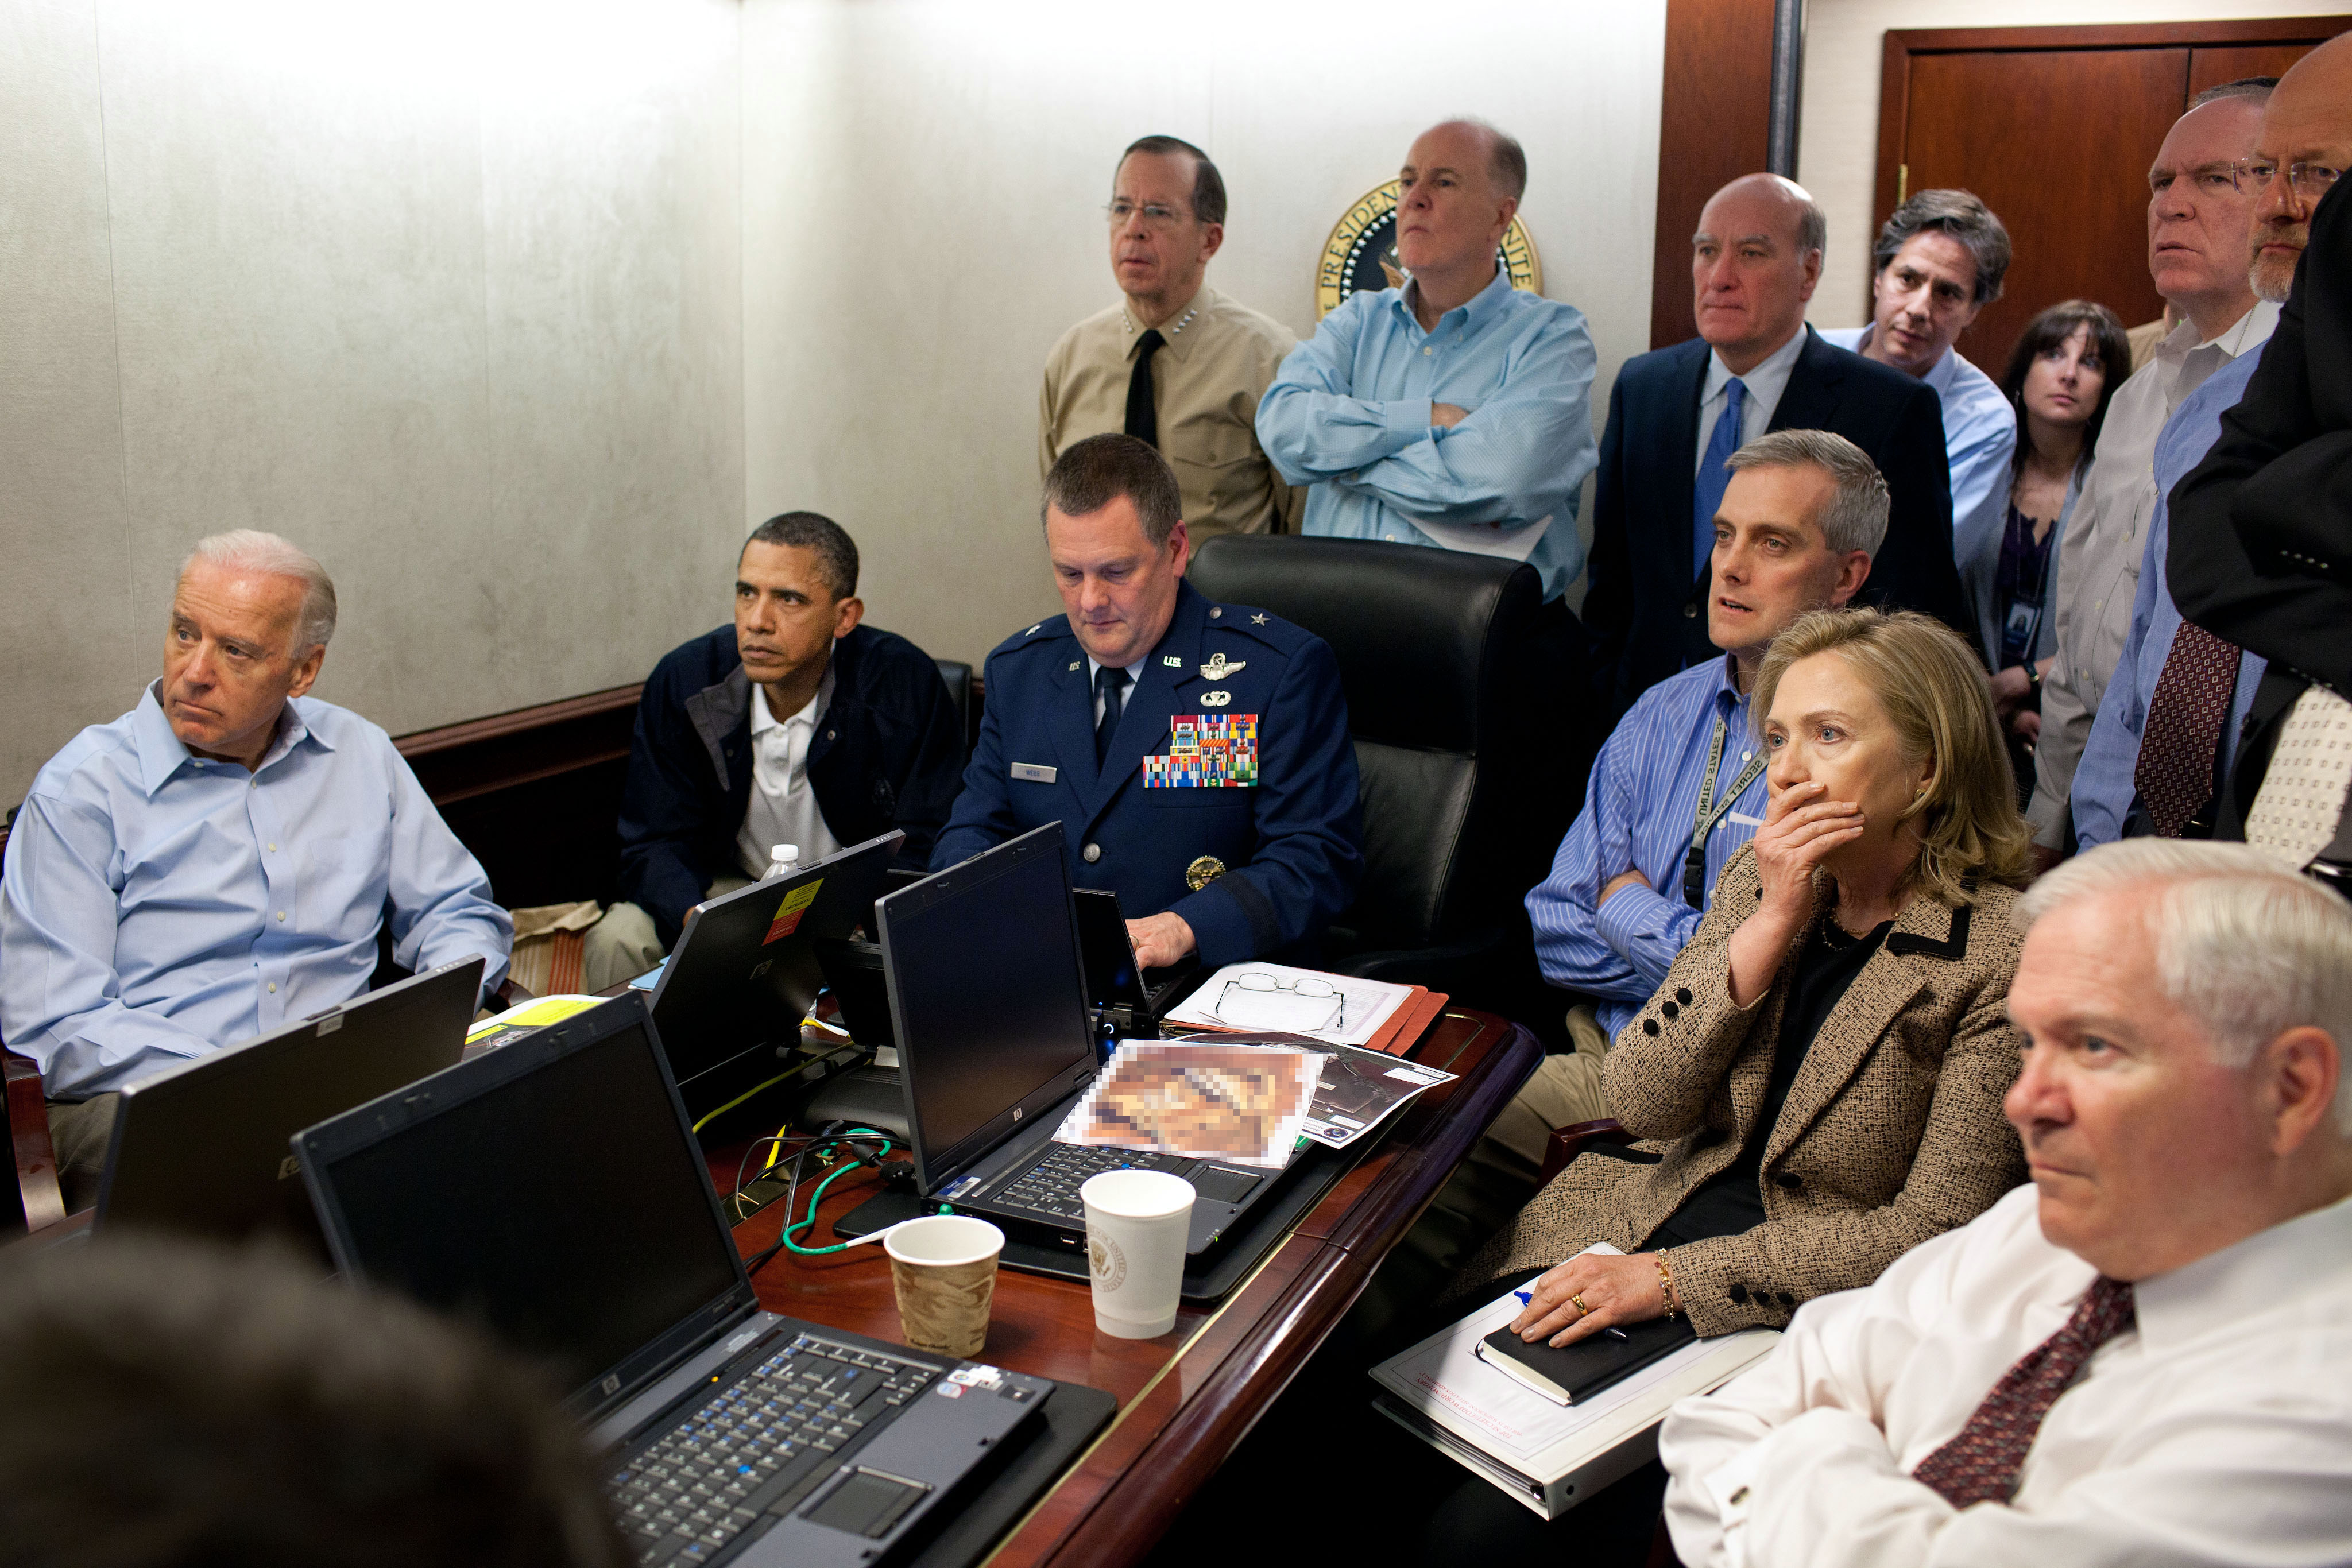 President Barack Obama, Vice President Joe Biden and former Secretary of State Hillary Clinton, along with with members of the national security team, receive an update on the mission against Osama bin Laden in the Situation Room of the White House in Washington, D.C., on May 1, 2011. (Pete Souza—The White House)